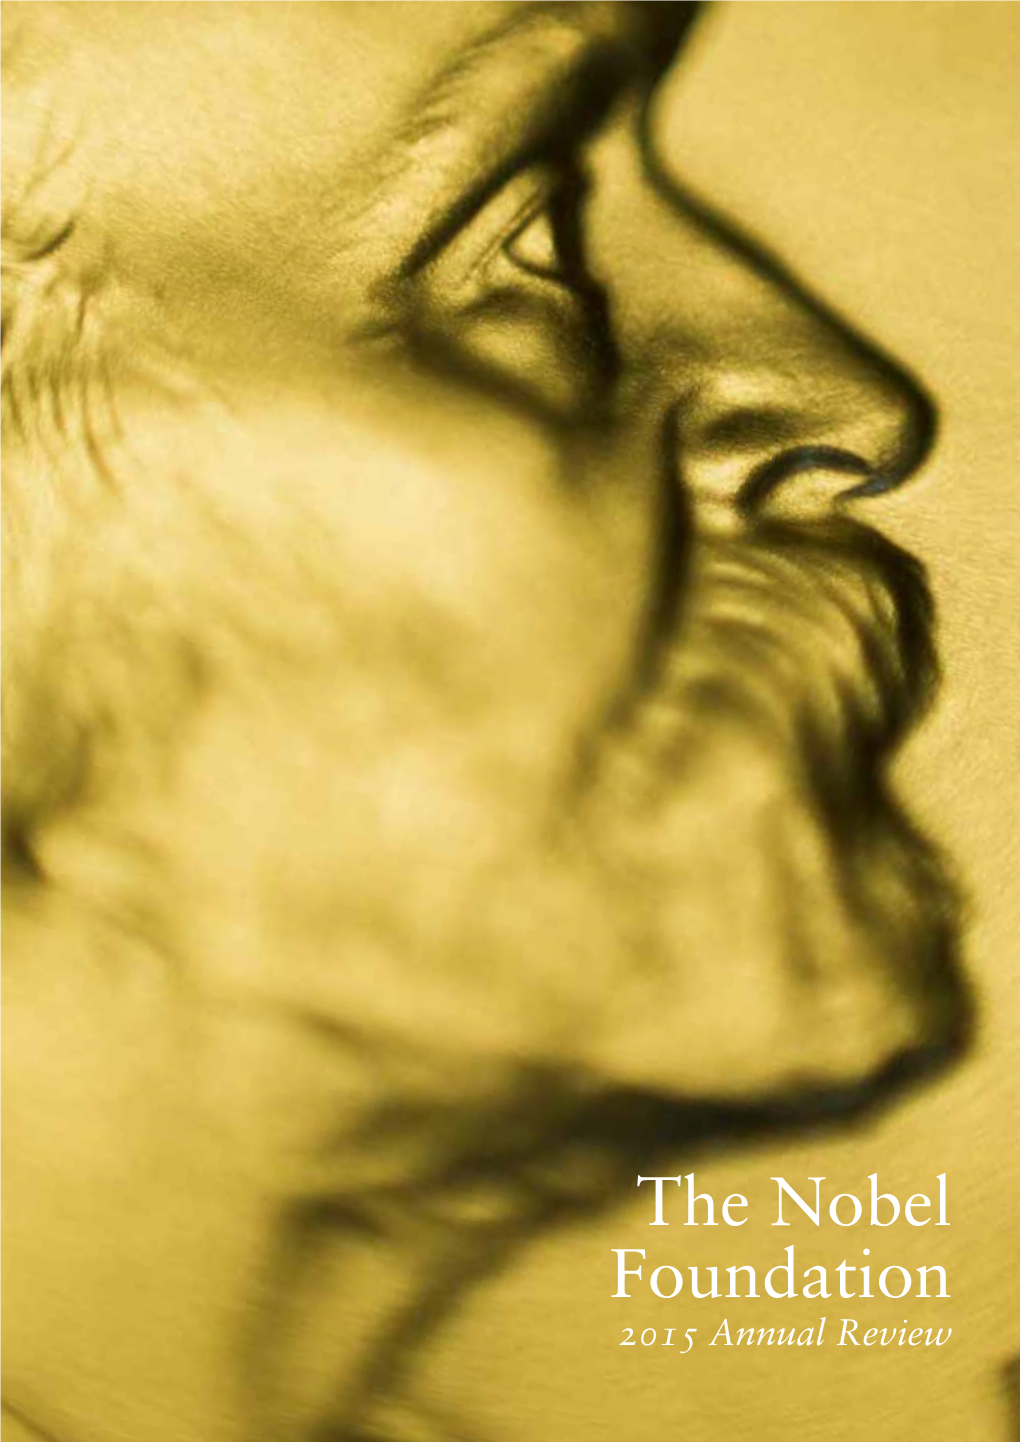 The Nobel Foundation 2015 Annual Review (Pdf)